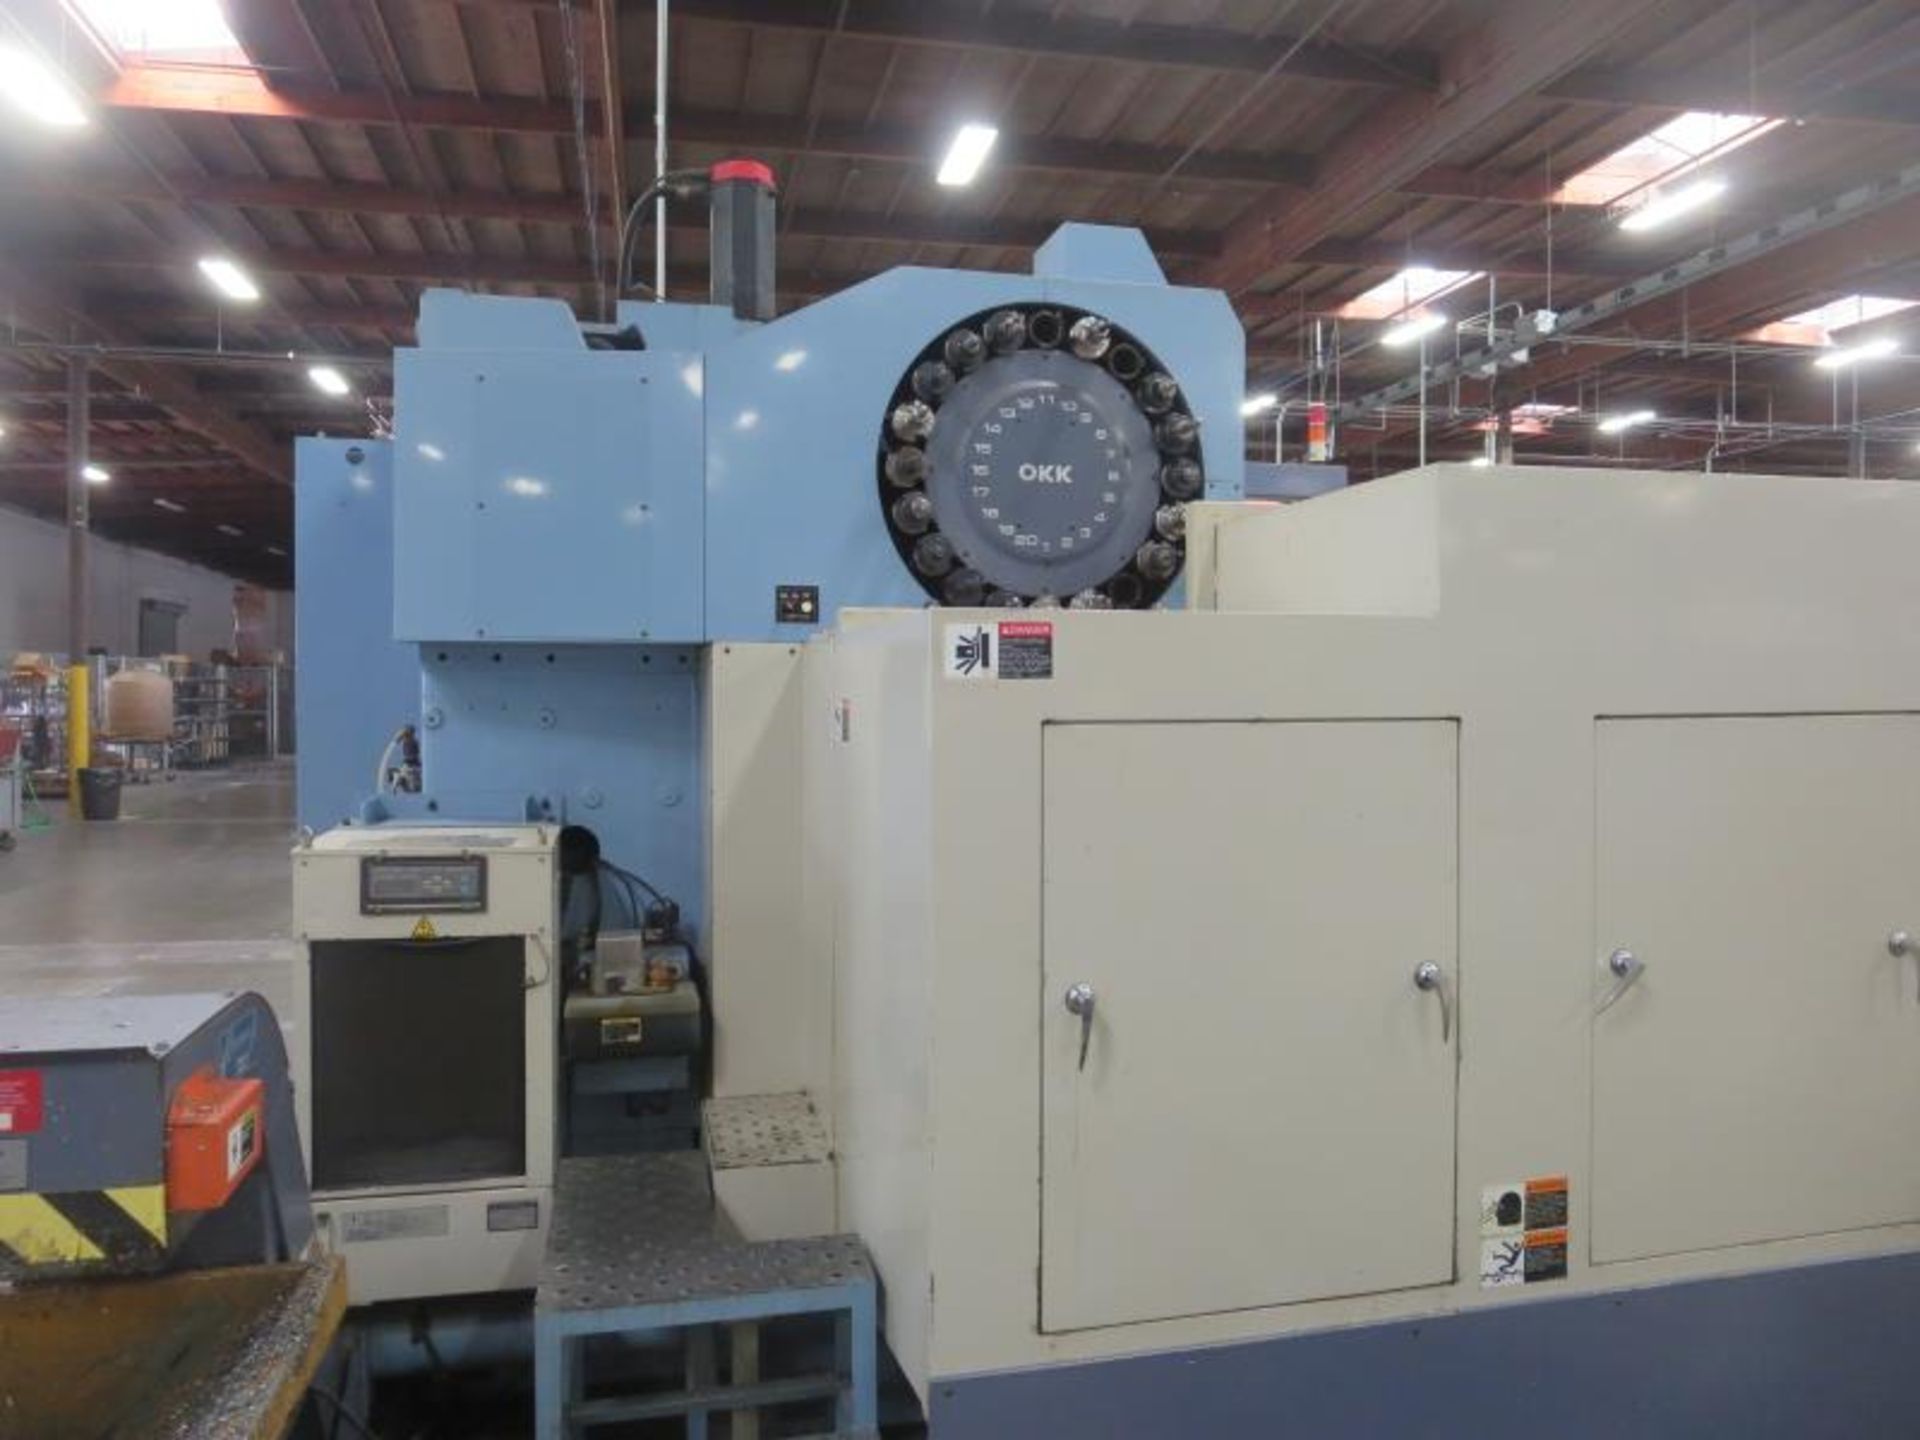 OKK VM7 CNC Vertical Machining Center. 3 Axis 7.5hp, 2 Step Max 10,000 RPM Spindle, Approx. 61" x - Image 4 of 13